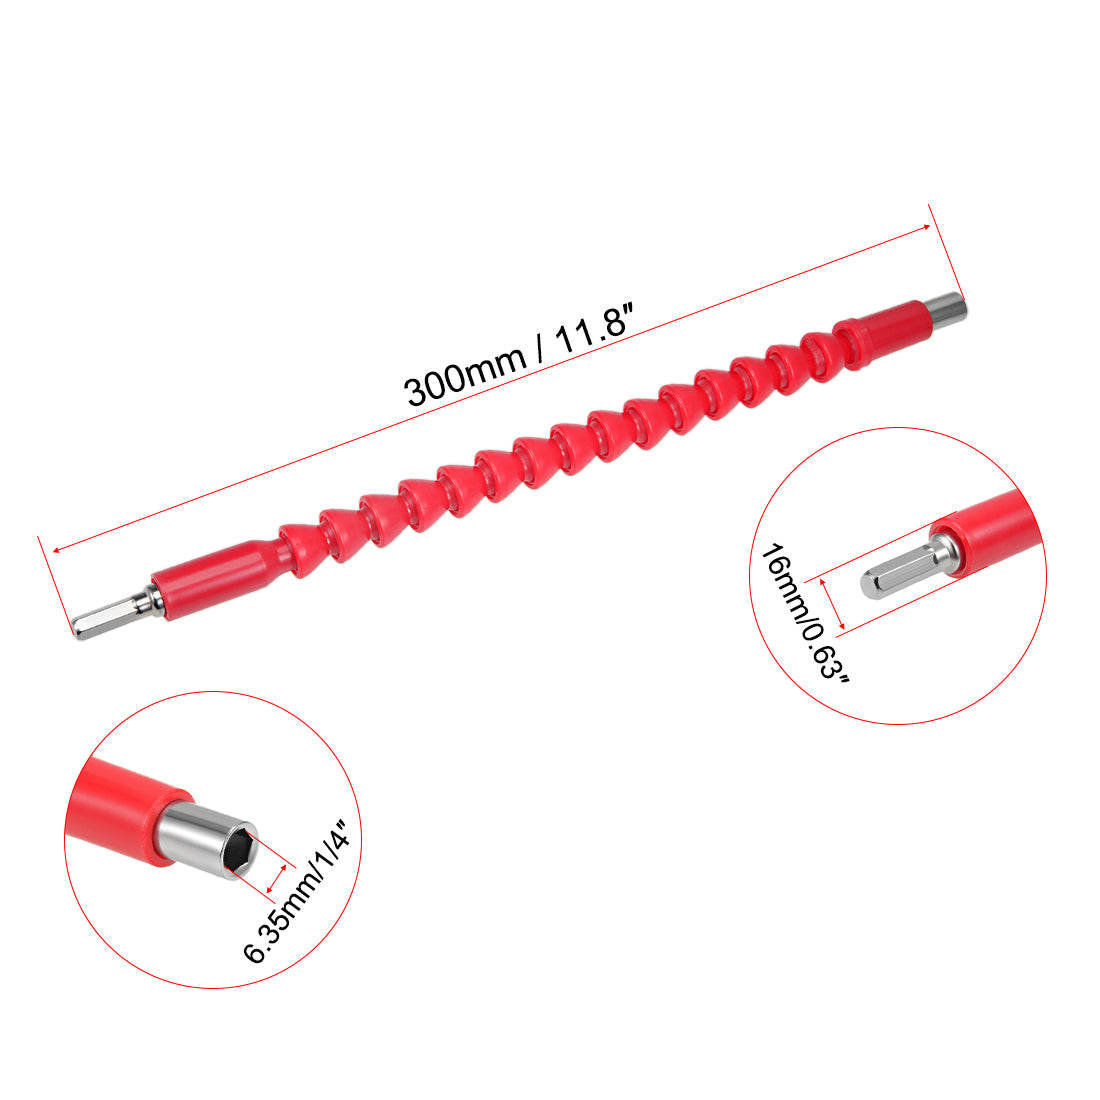 uxcell Uxcell Flexible Extension Screwdriver Bit Holder Magnetic Hex Shaft Screw Drill Connection Tip ,11.8 inch Flex Shaft,1/4''-Hexagon Drill Red